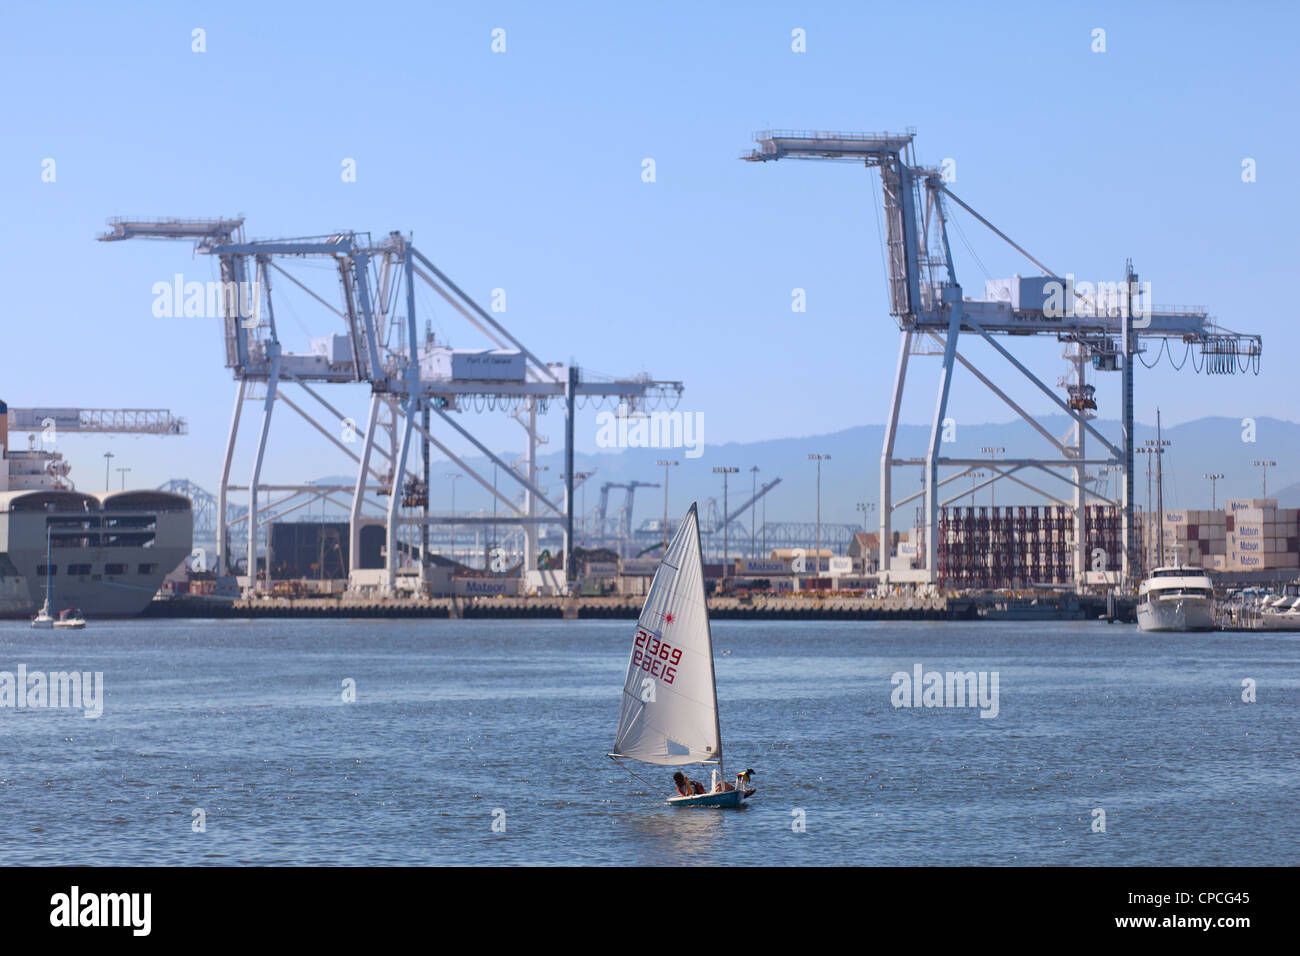 A small sail boat in an industrial harbor Stock Photo